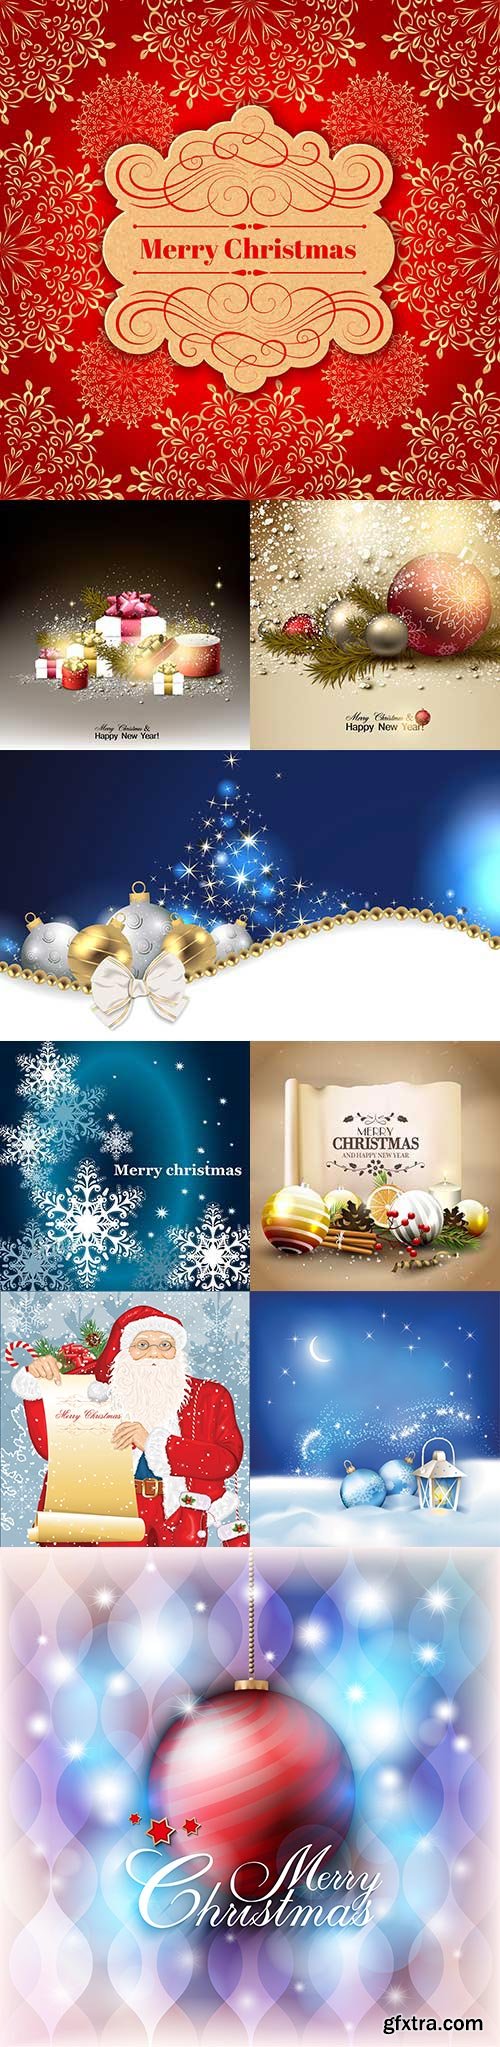 New year\'s backgrounds in vector - 11